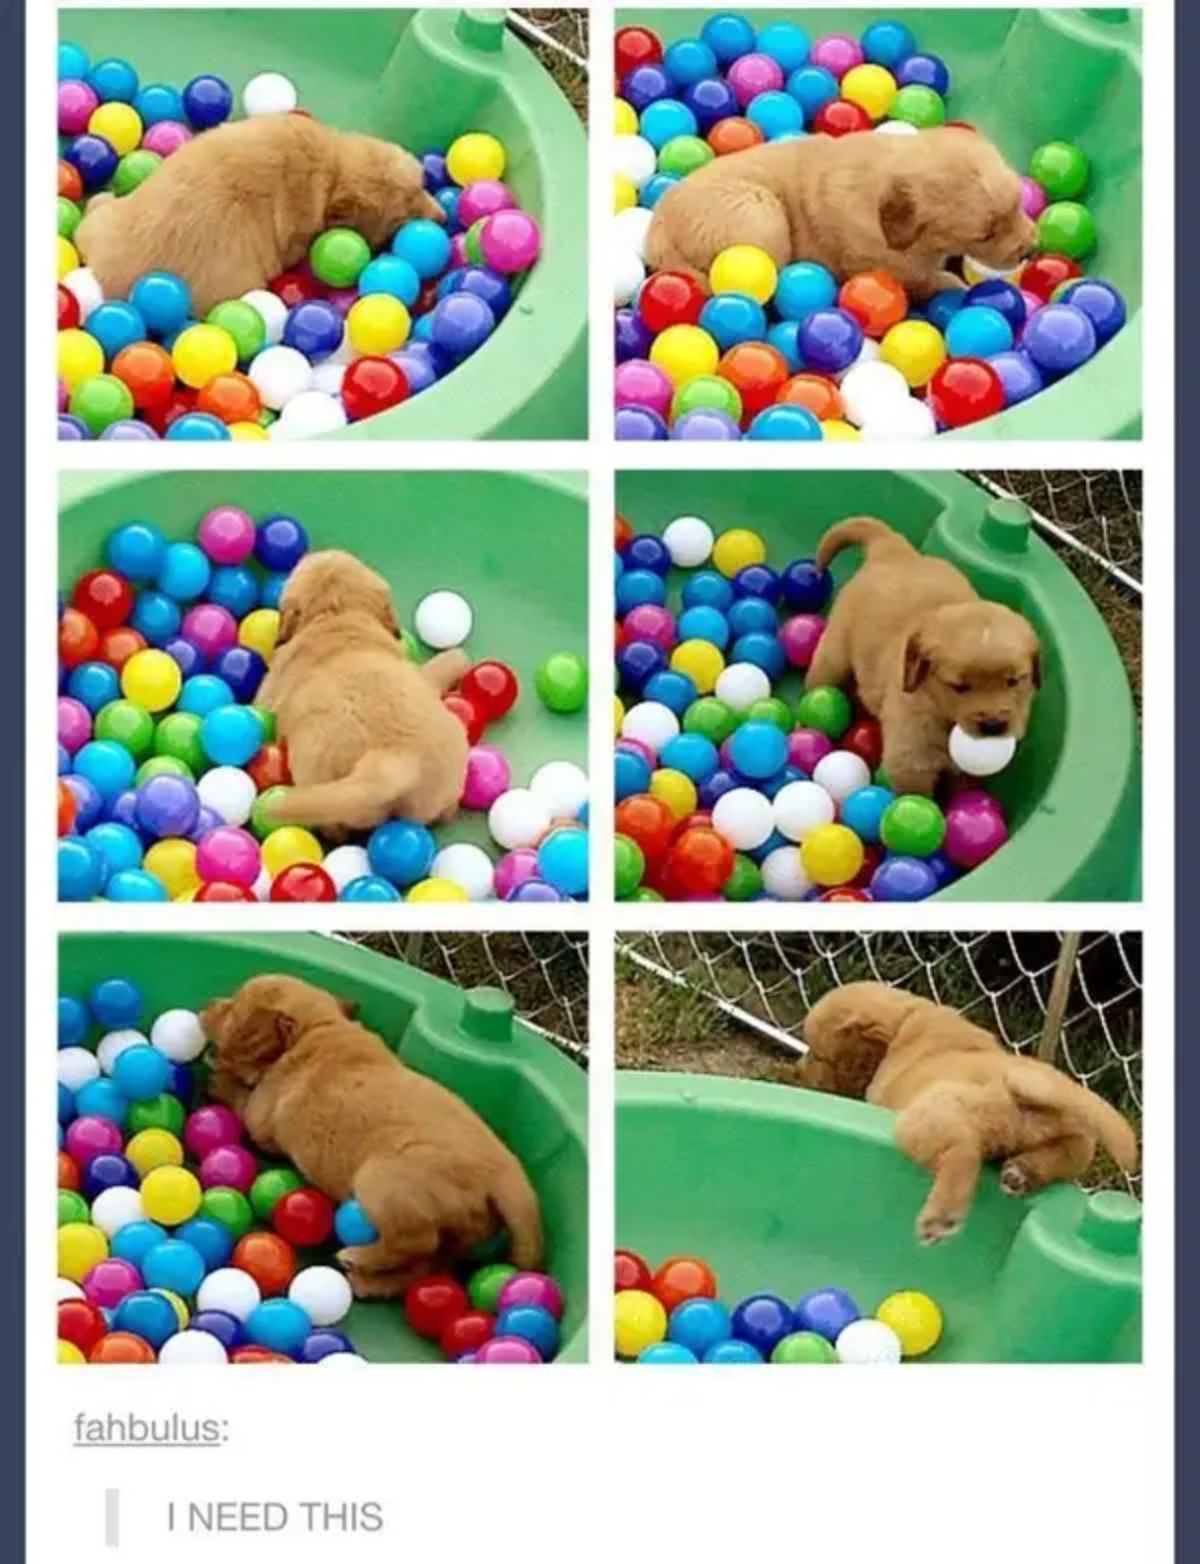 6 photos of a golden retriever puppy in a green ball pit playing with balls